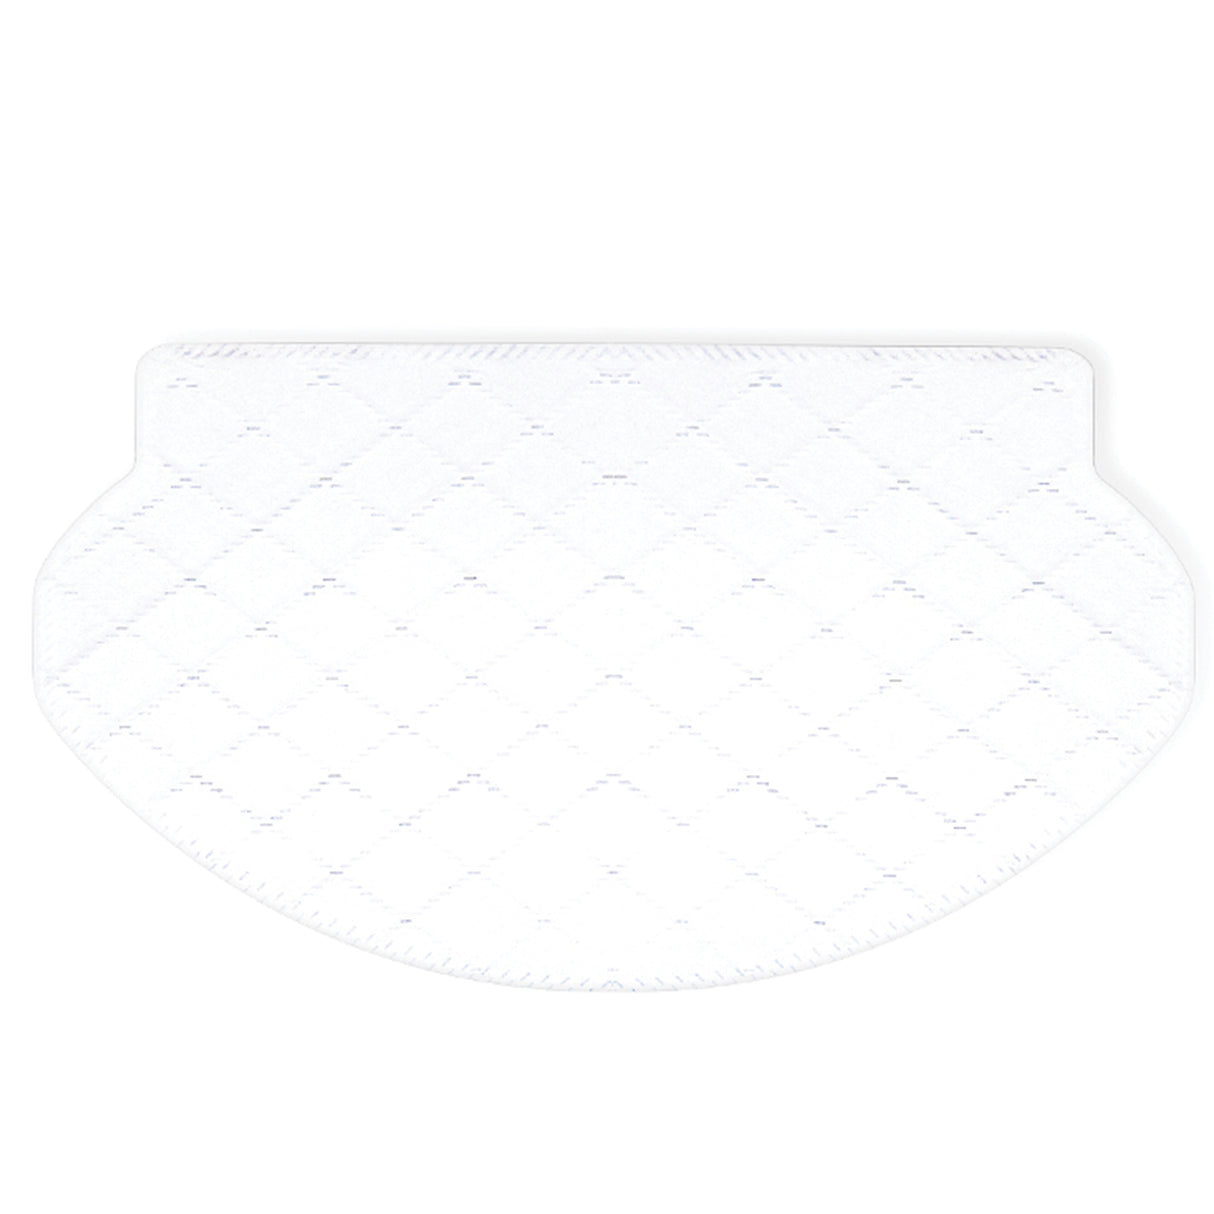 DEEBOT OZMO 920/950 Disposable Microfiber Mopping Pads (50PCS)